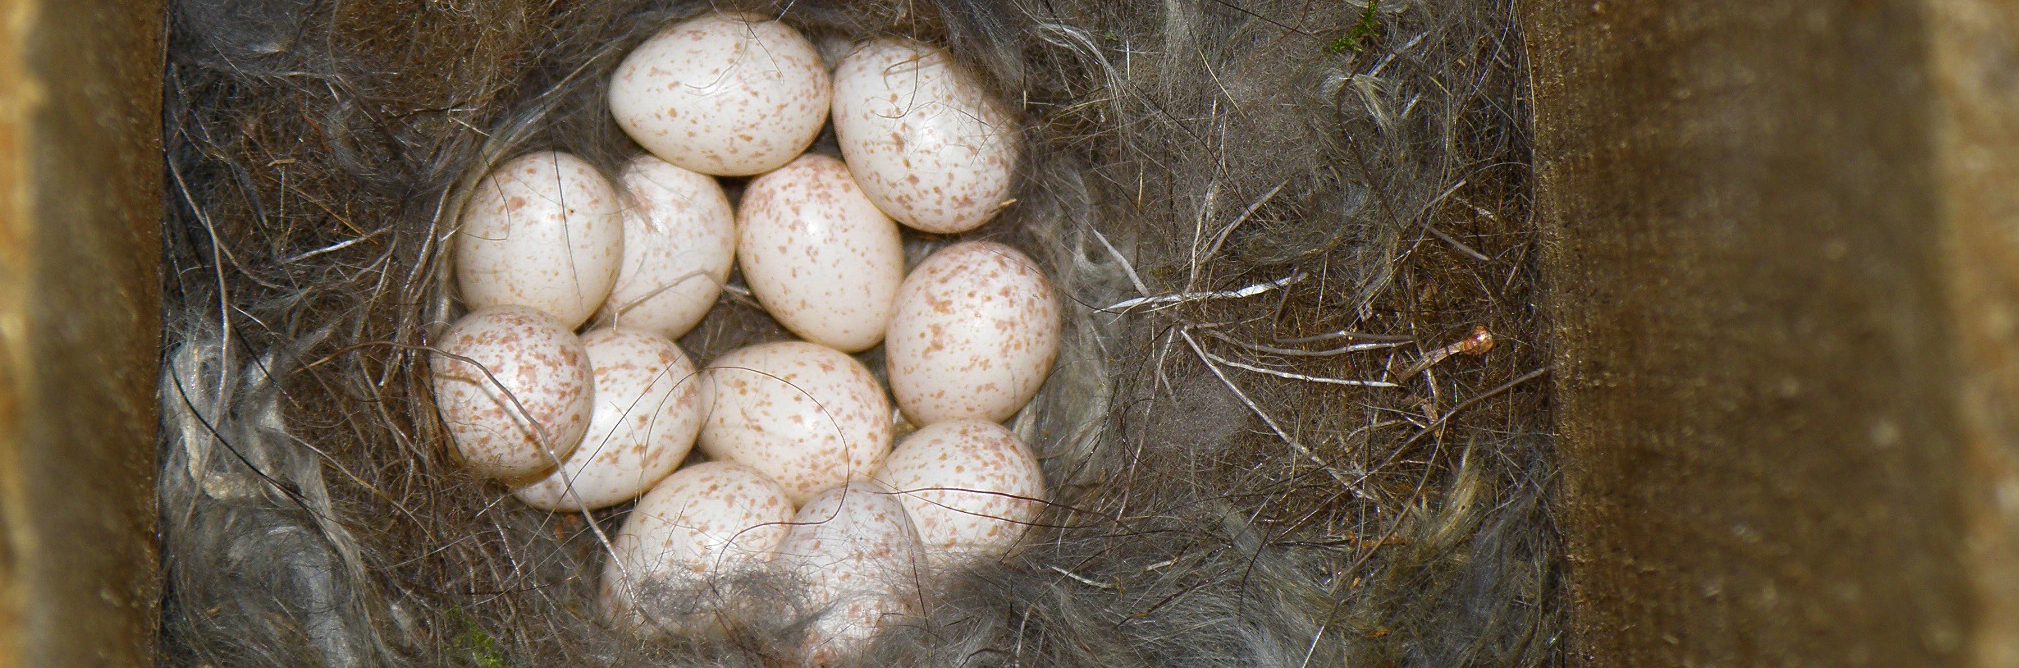 12 Great Tit eggs in a nest inside a nest box